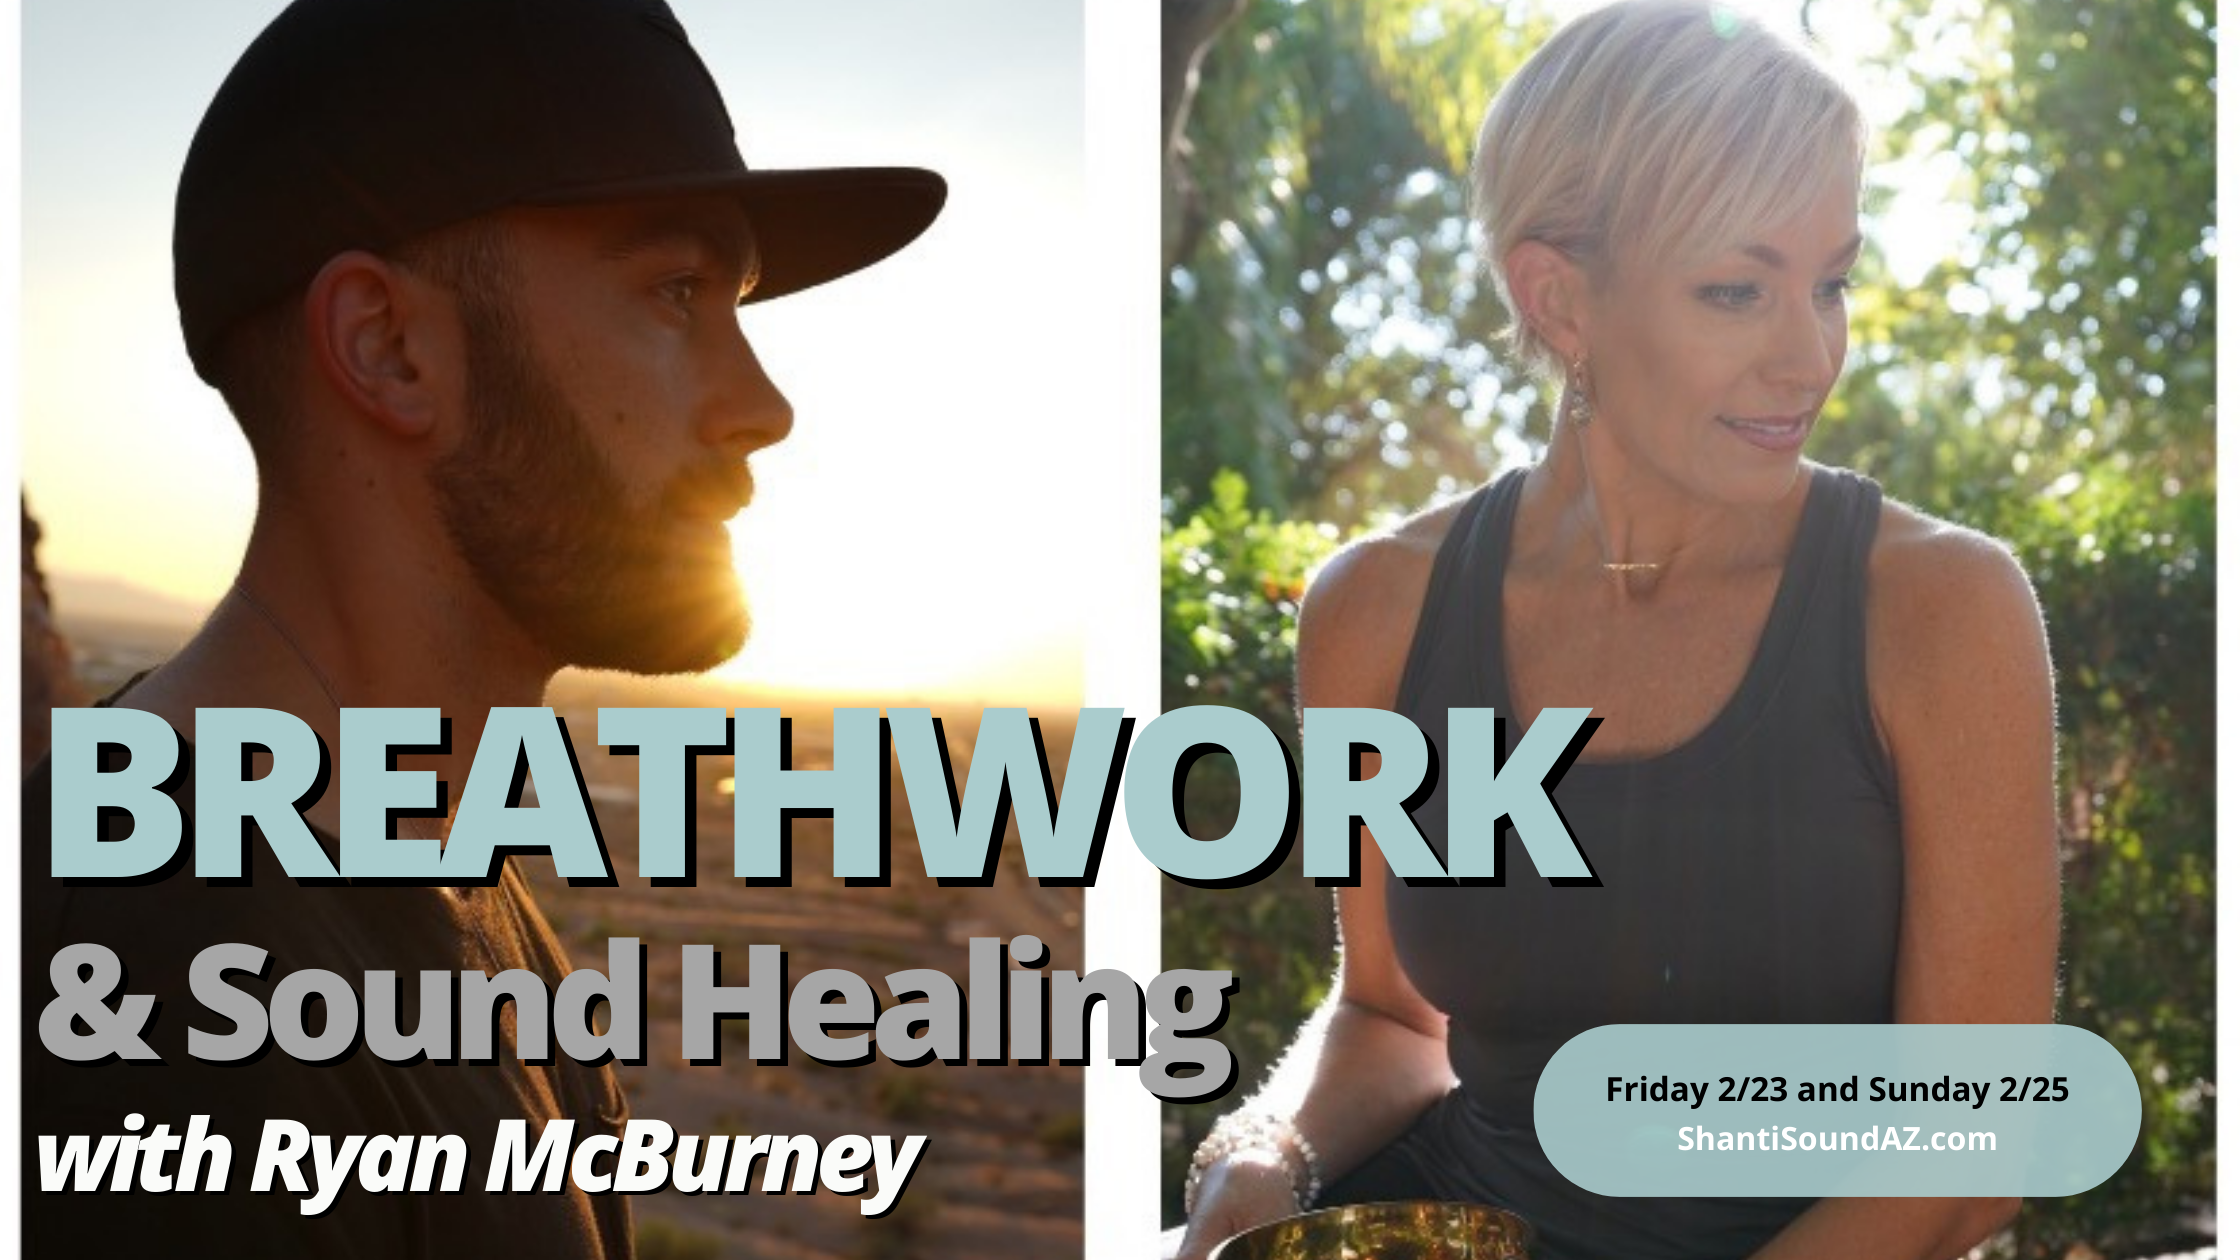 Featured image for “February Breathwork and Sound Healing Experience”